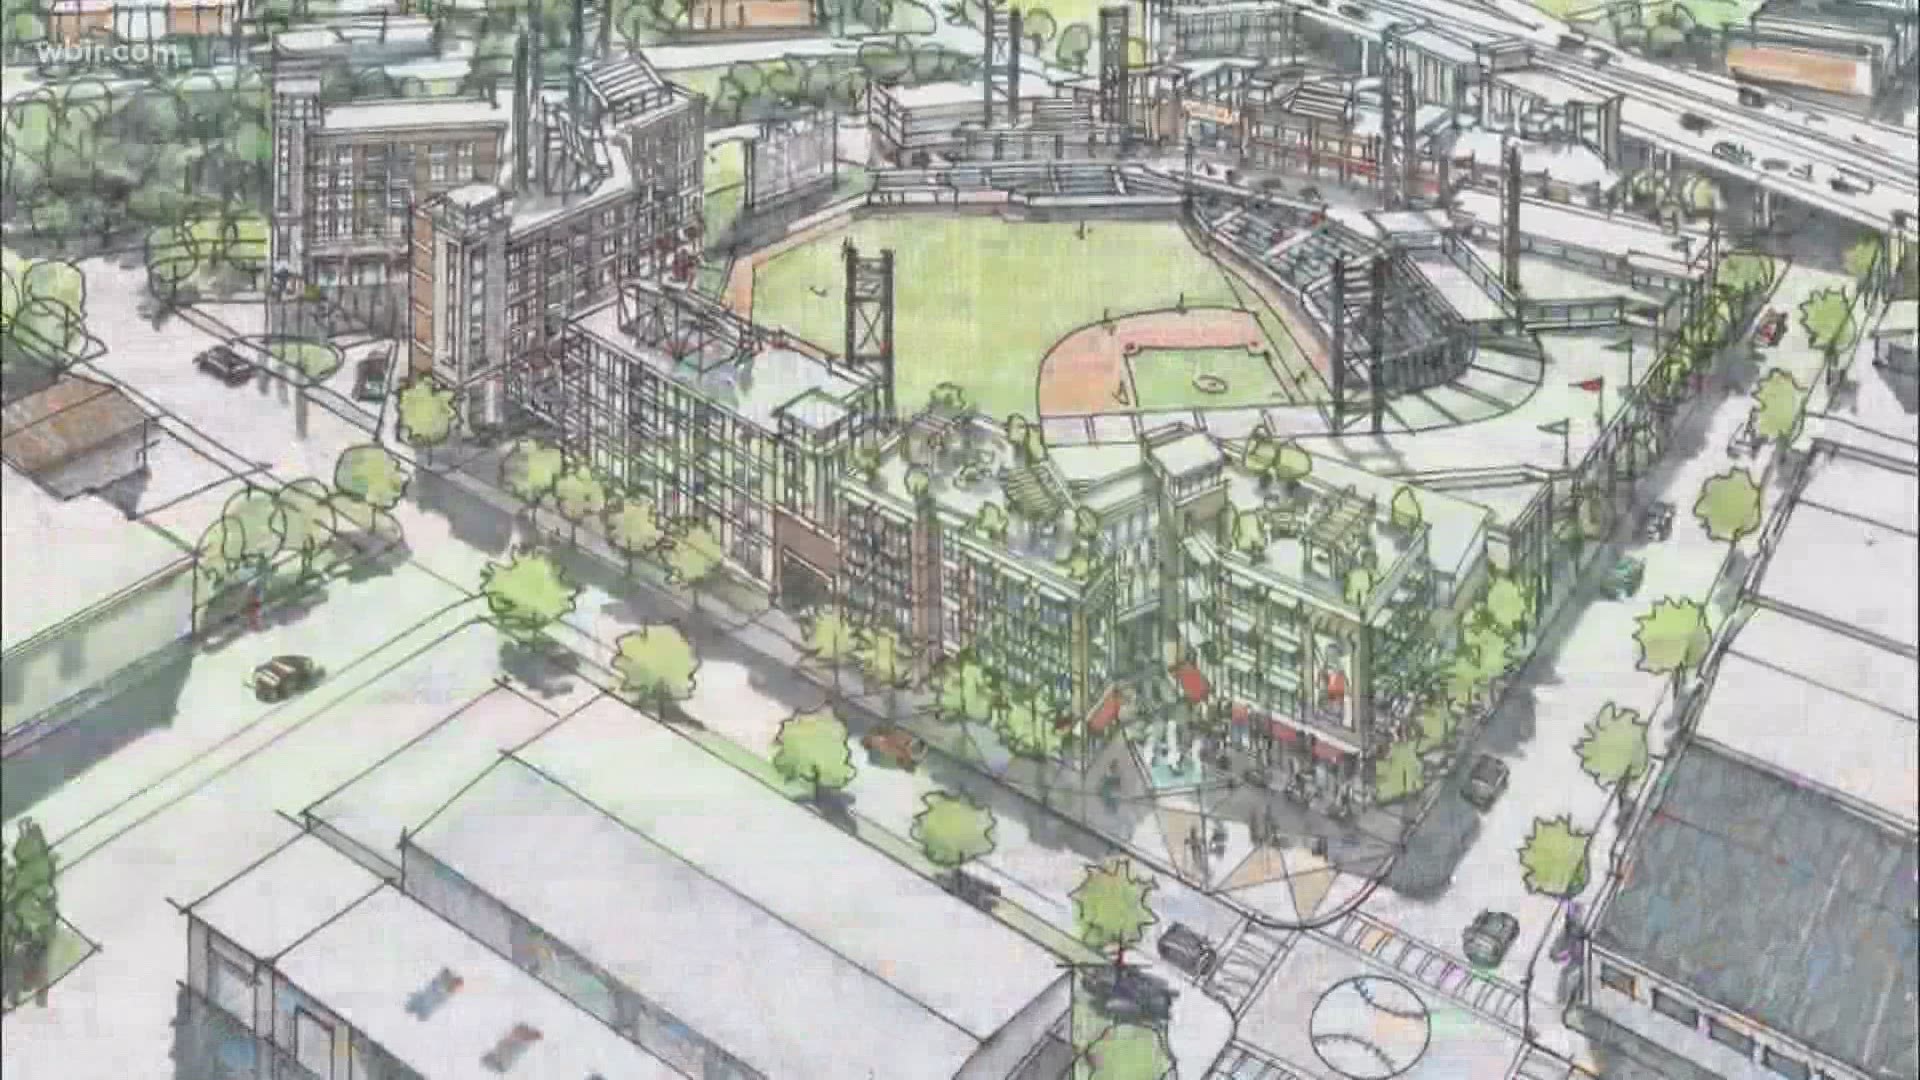 Funding that would help pay for a downtown stadium is facing scrutiny from state lawmakers.